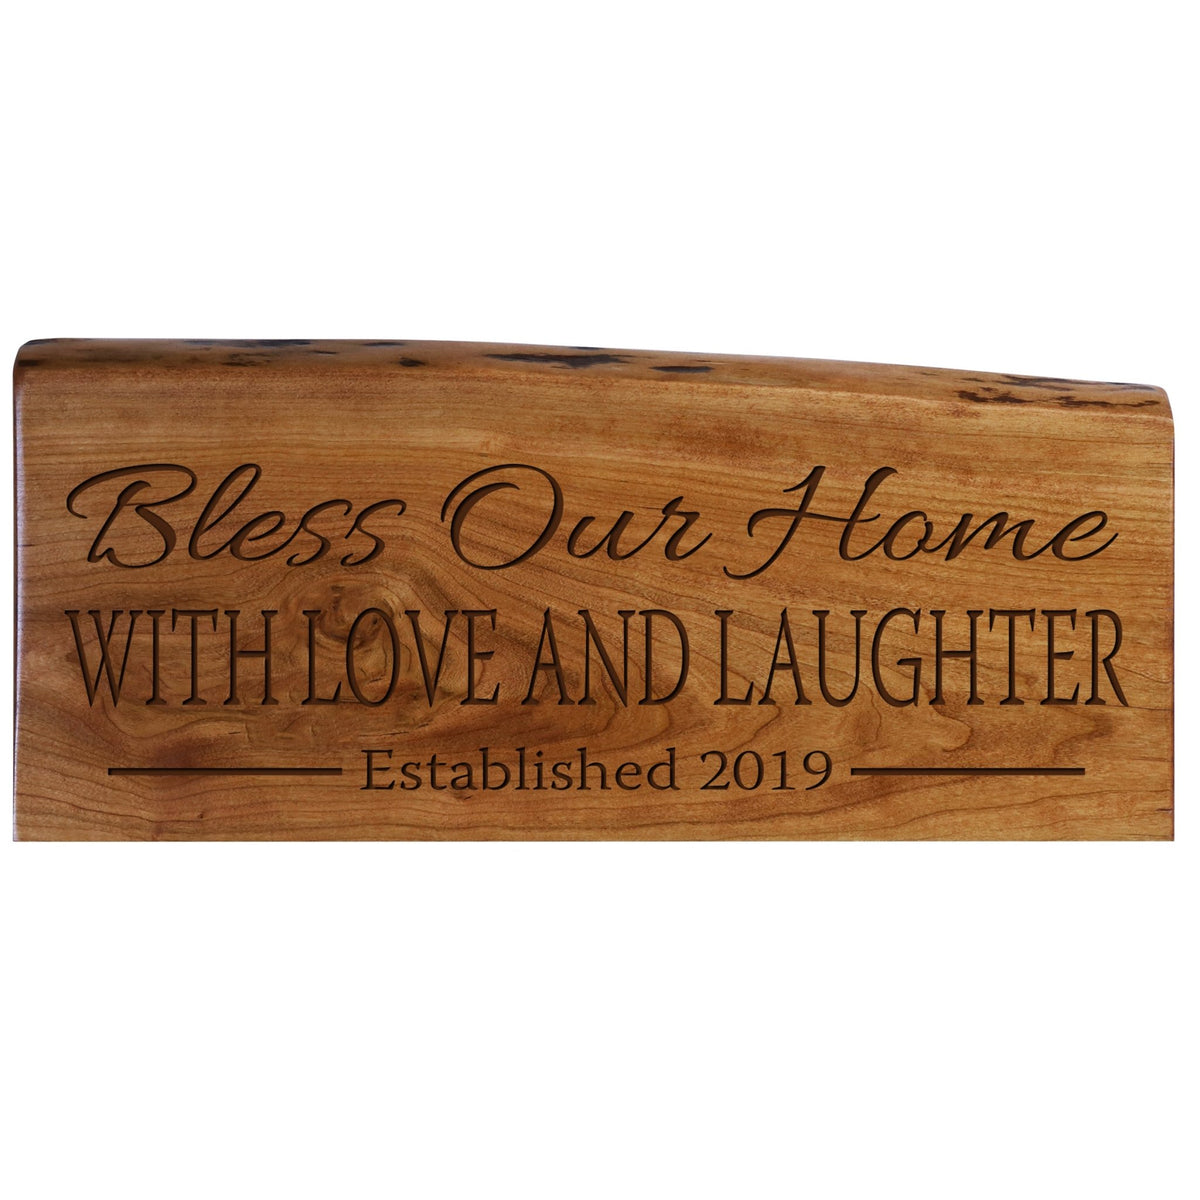 Personalized Home Decor Family Established Plaque - Bless Our Home - LifeSong Milestones